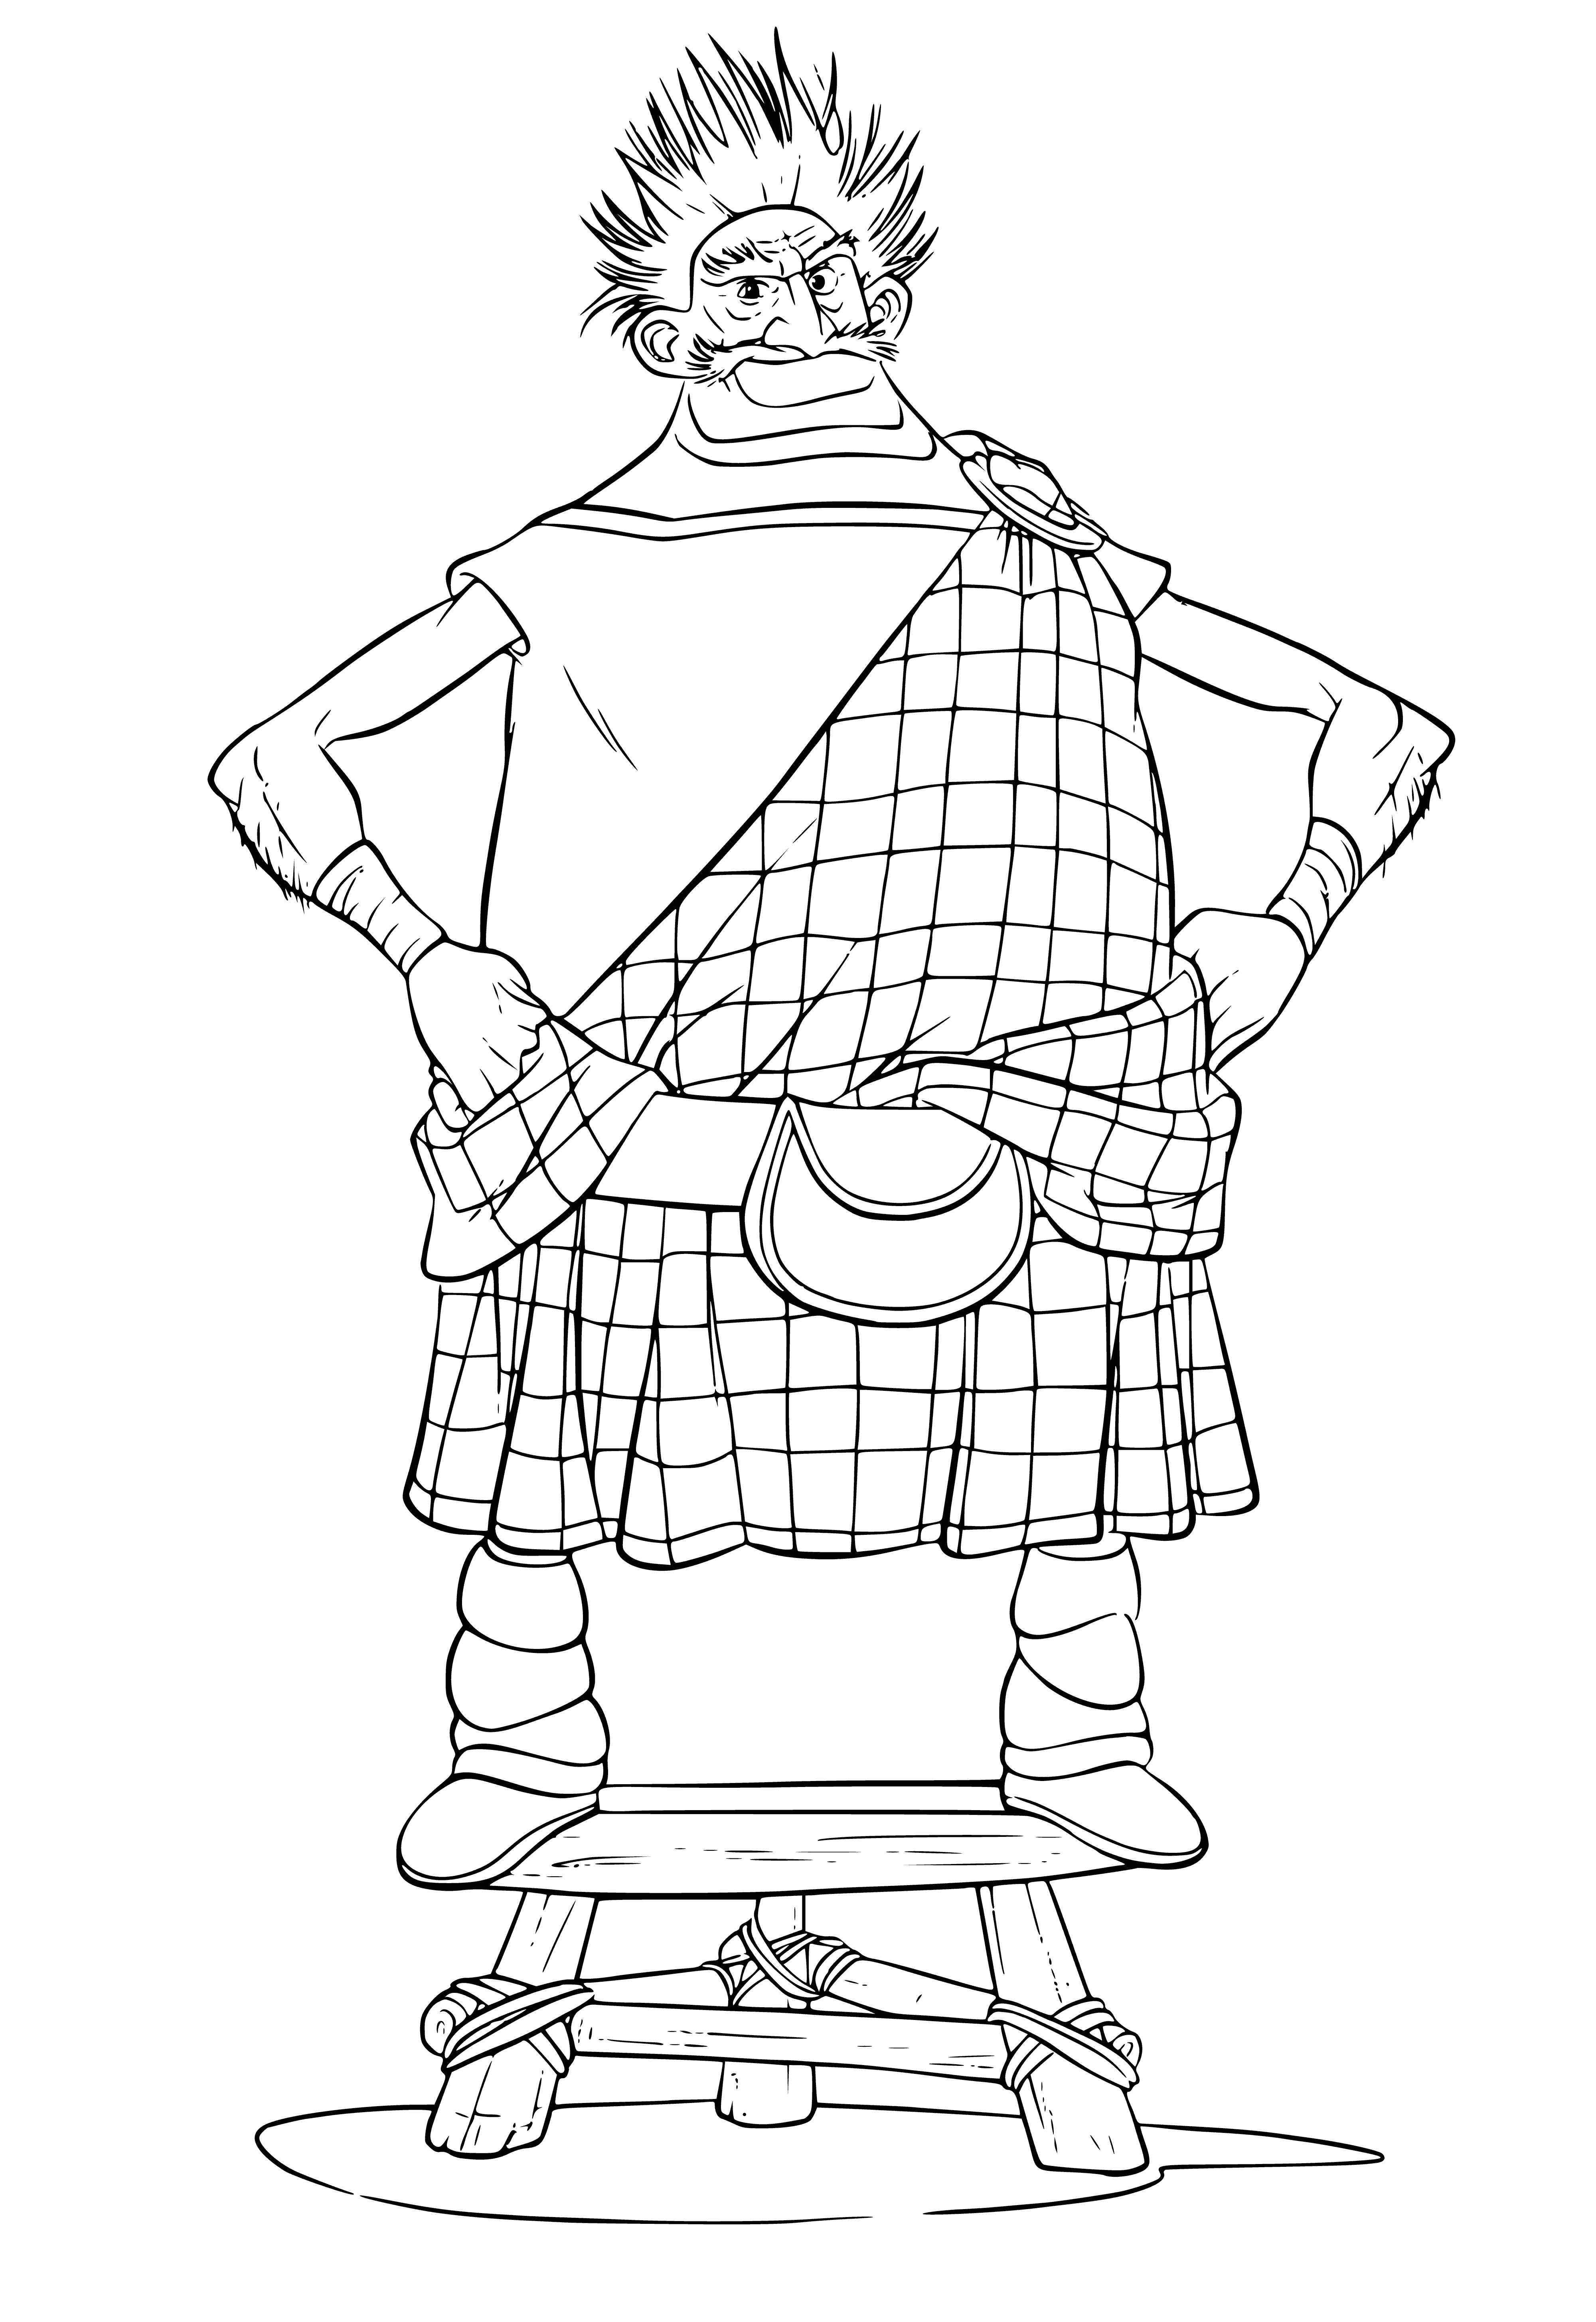 Lord Dingval coloring page